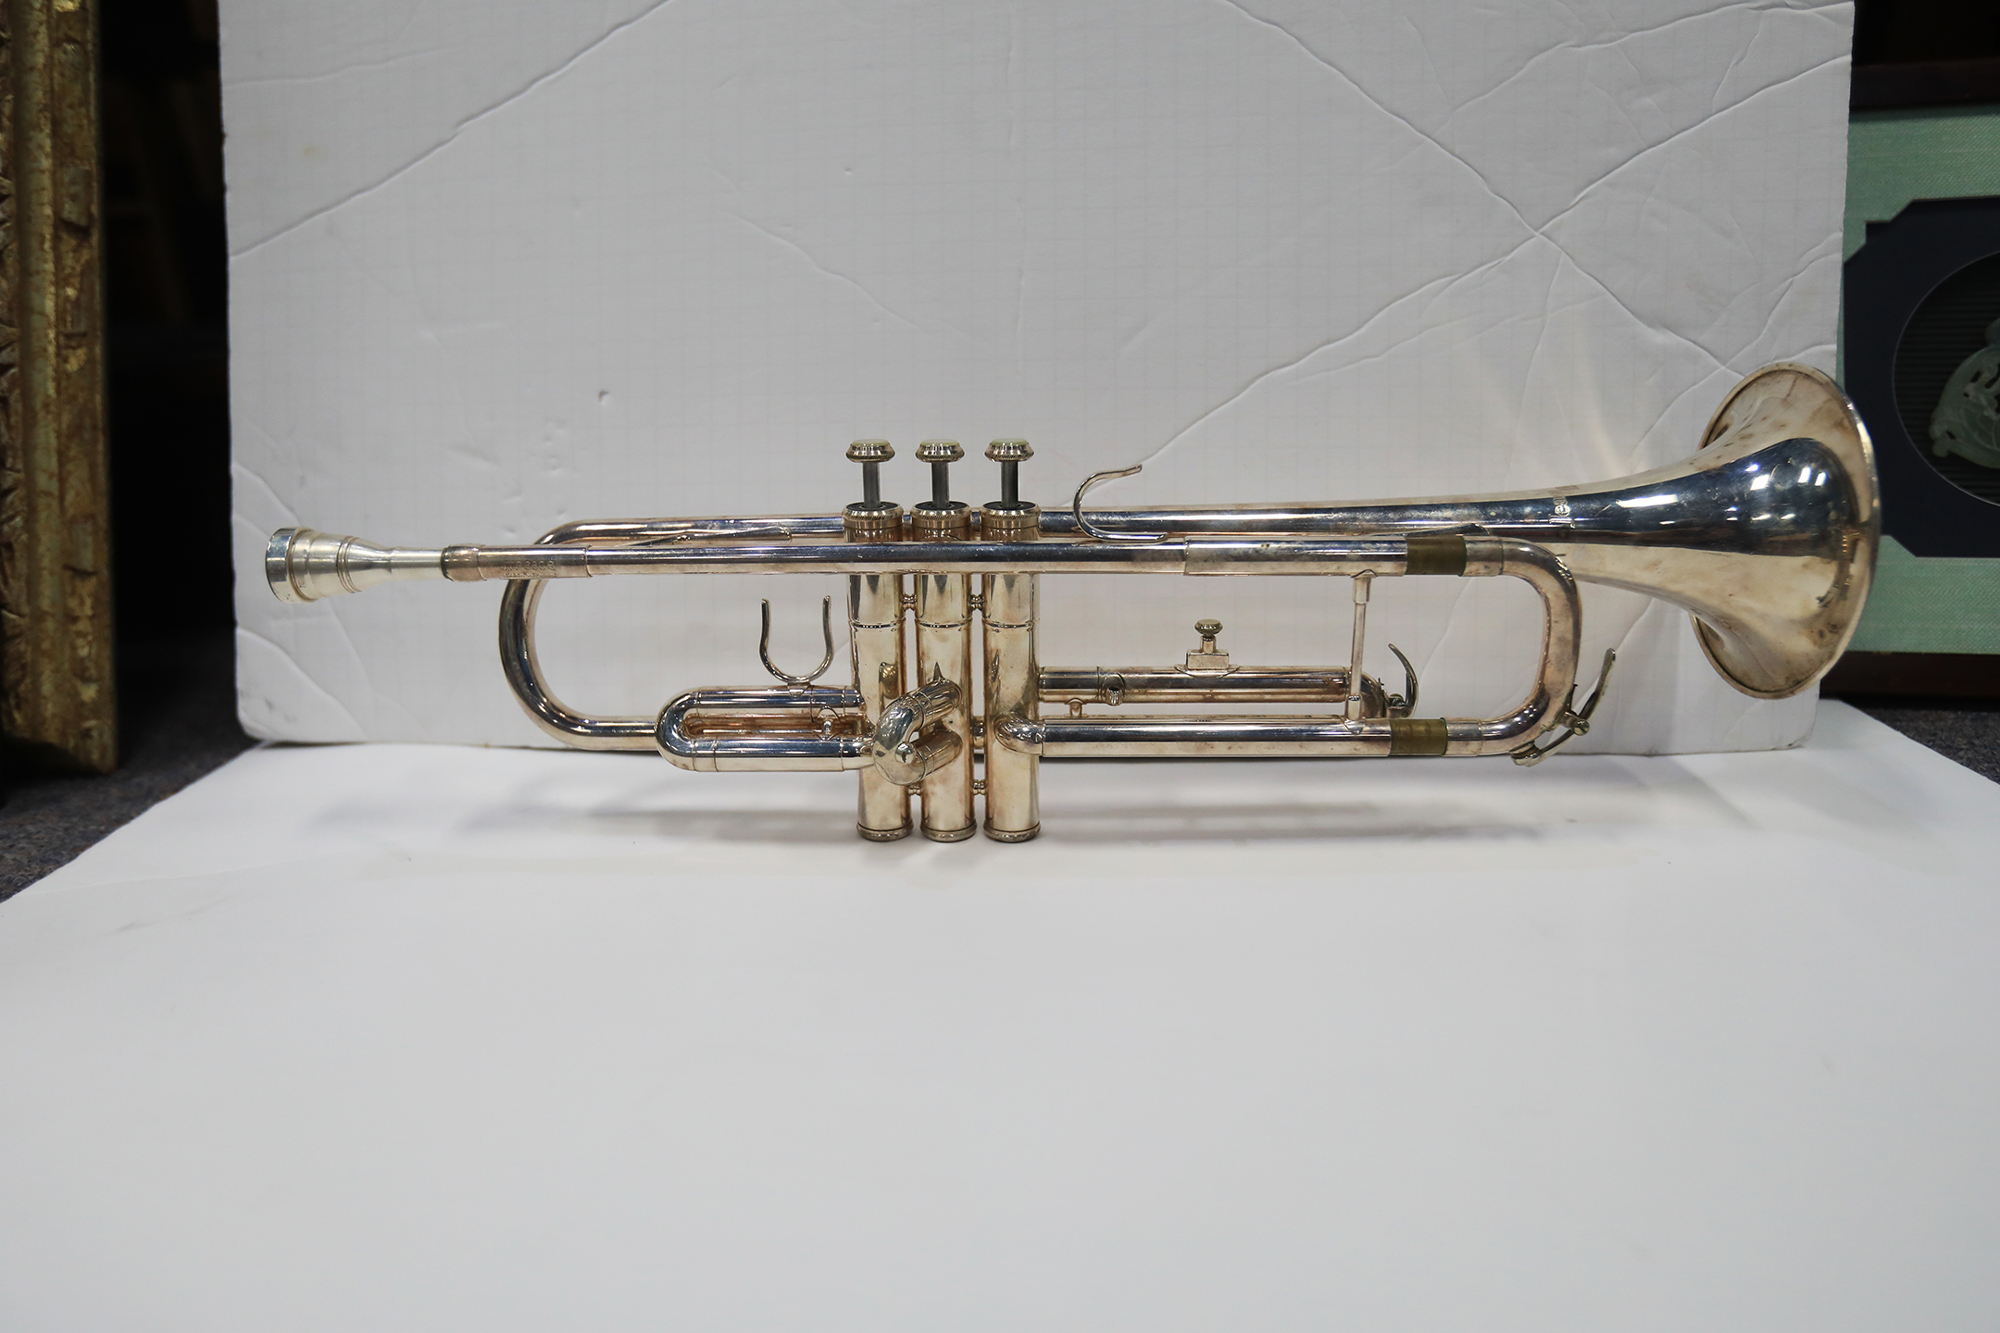 A Louis Armstrong-style trumpet